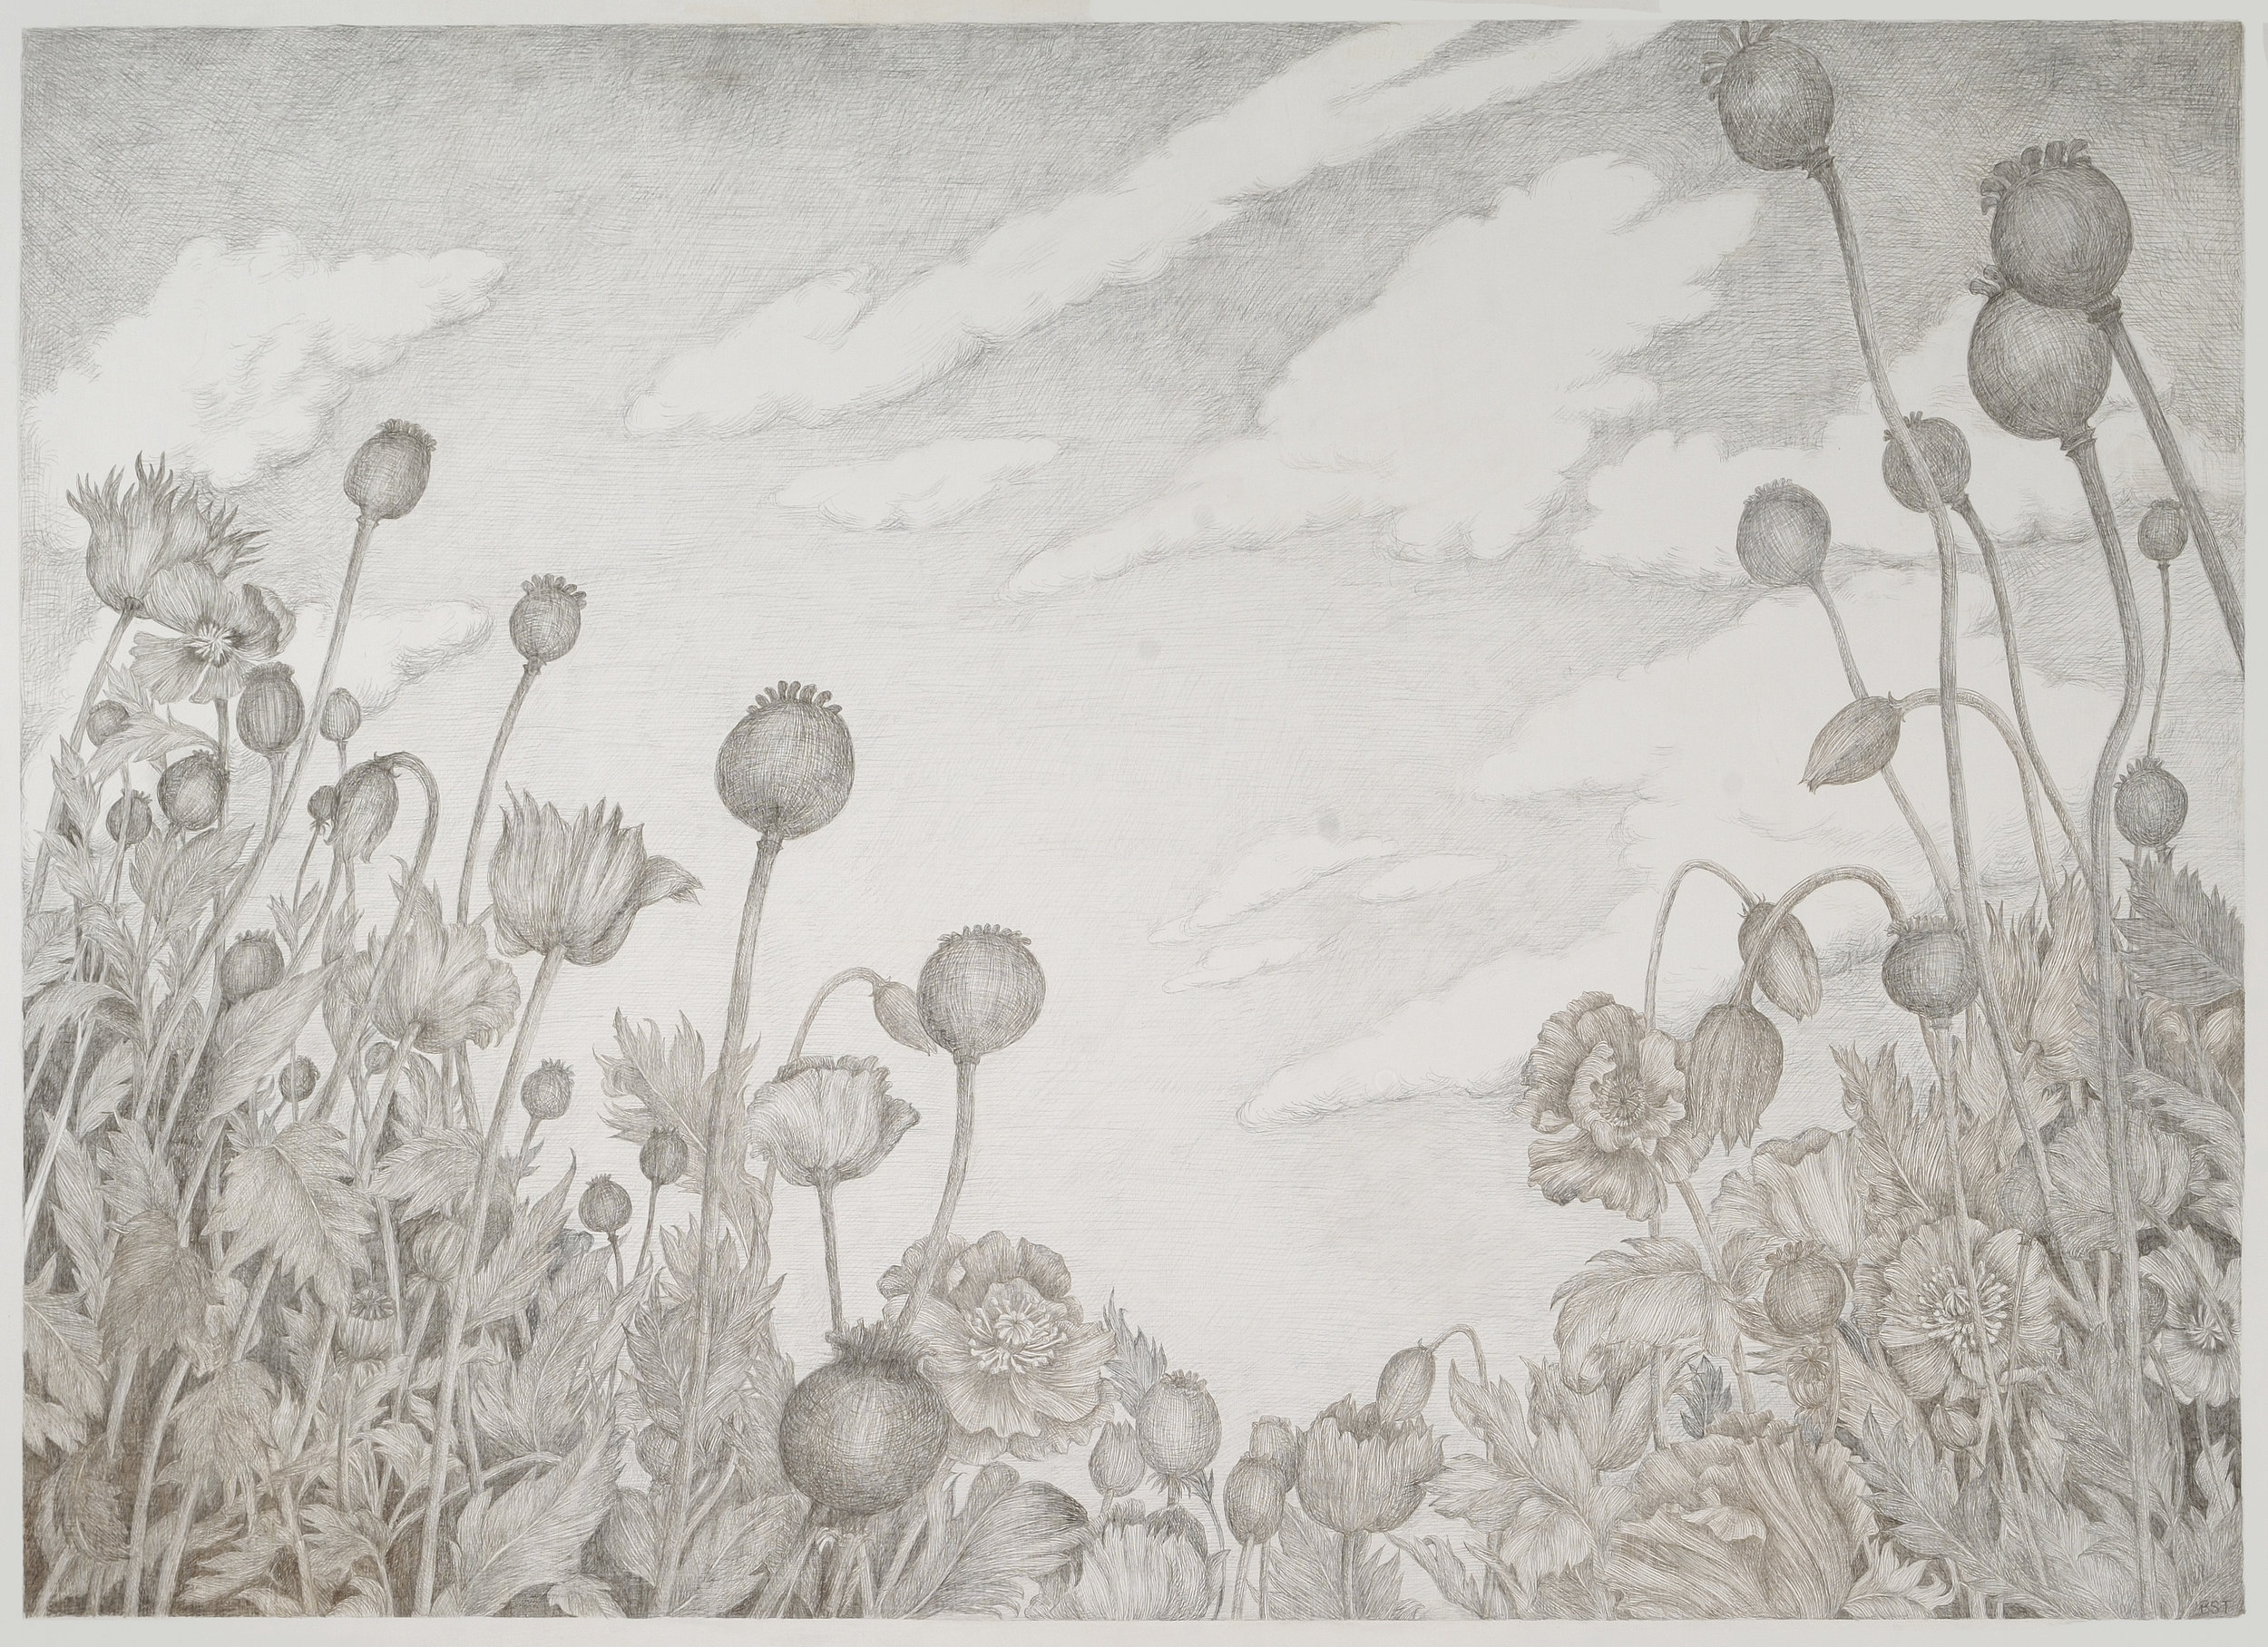 Poppies, 2014, silverpoint on paper, 27 x 30 in, $3,500